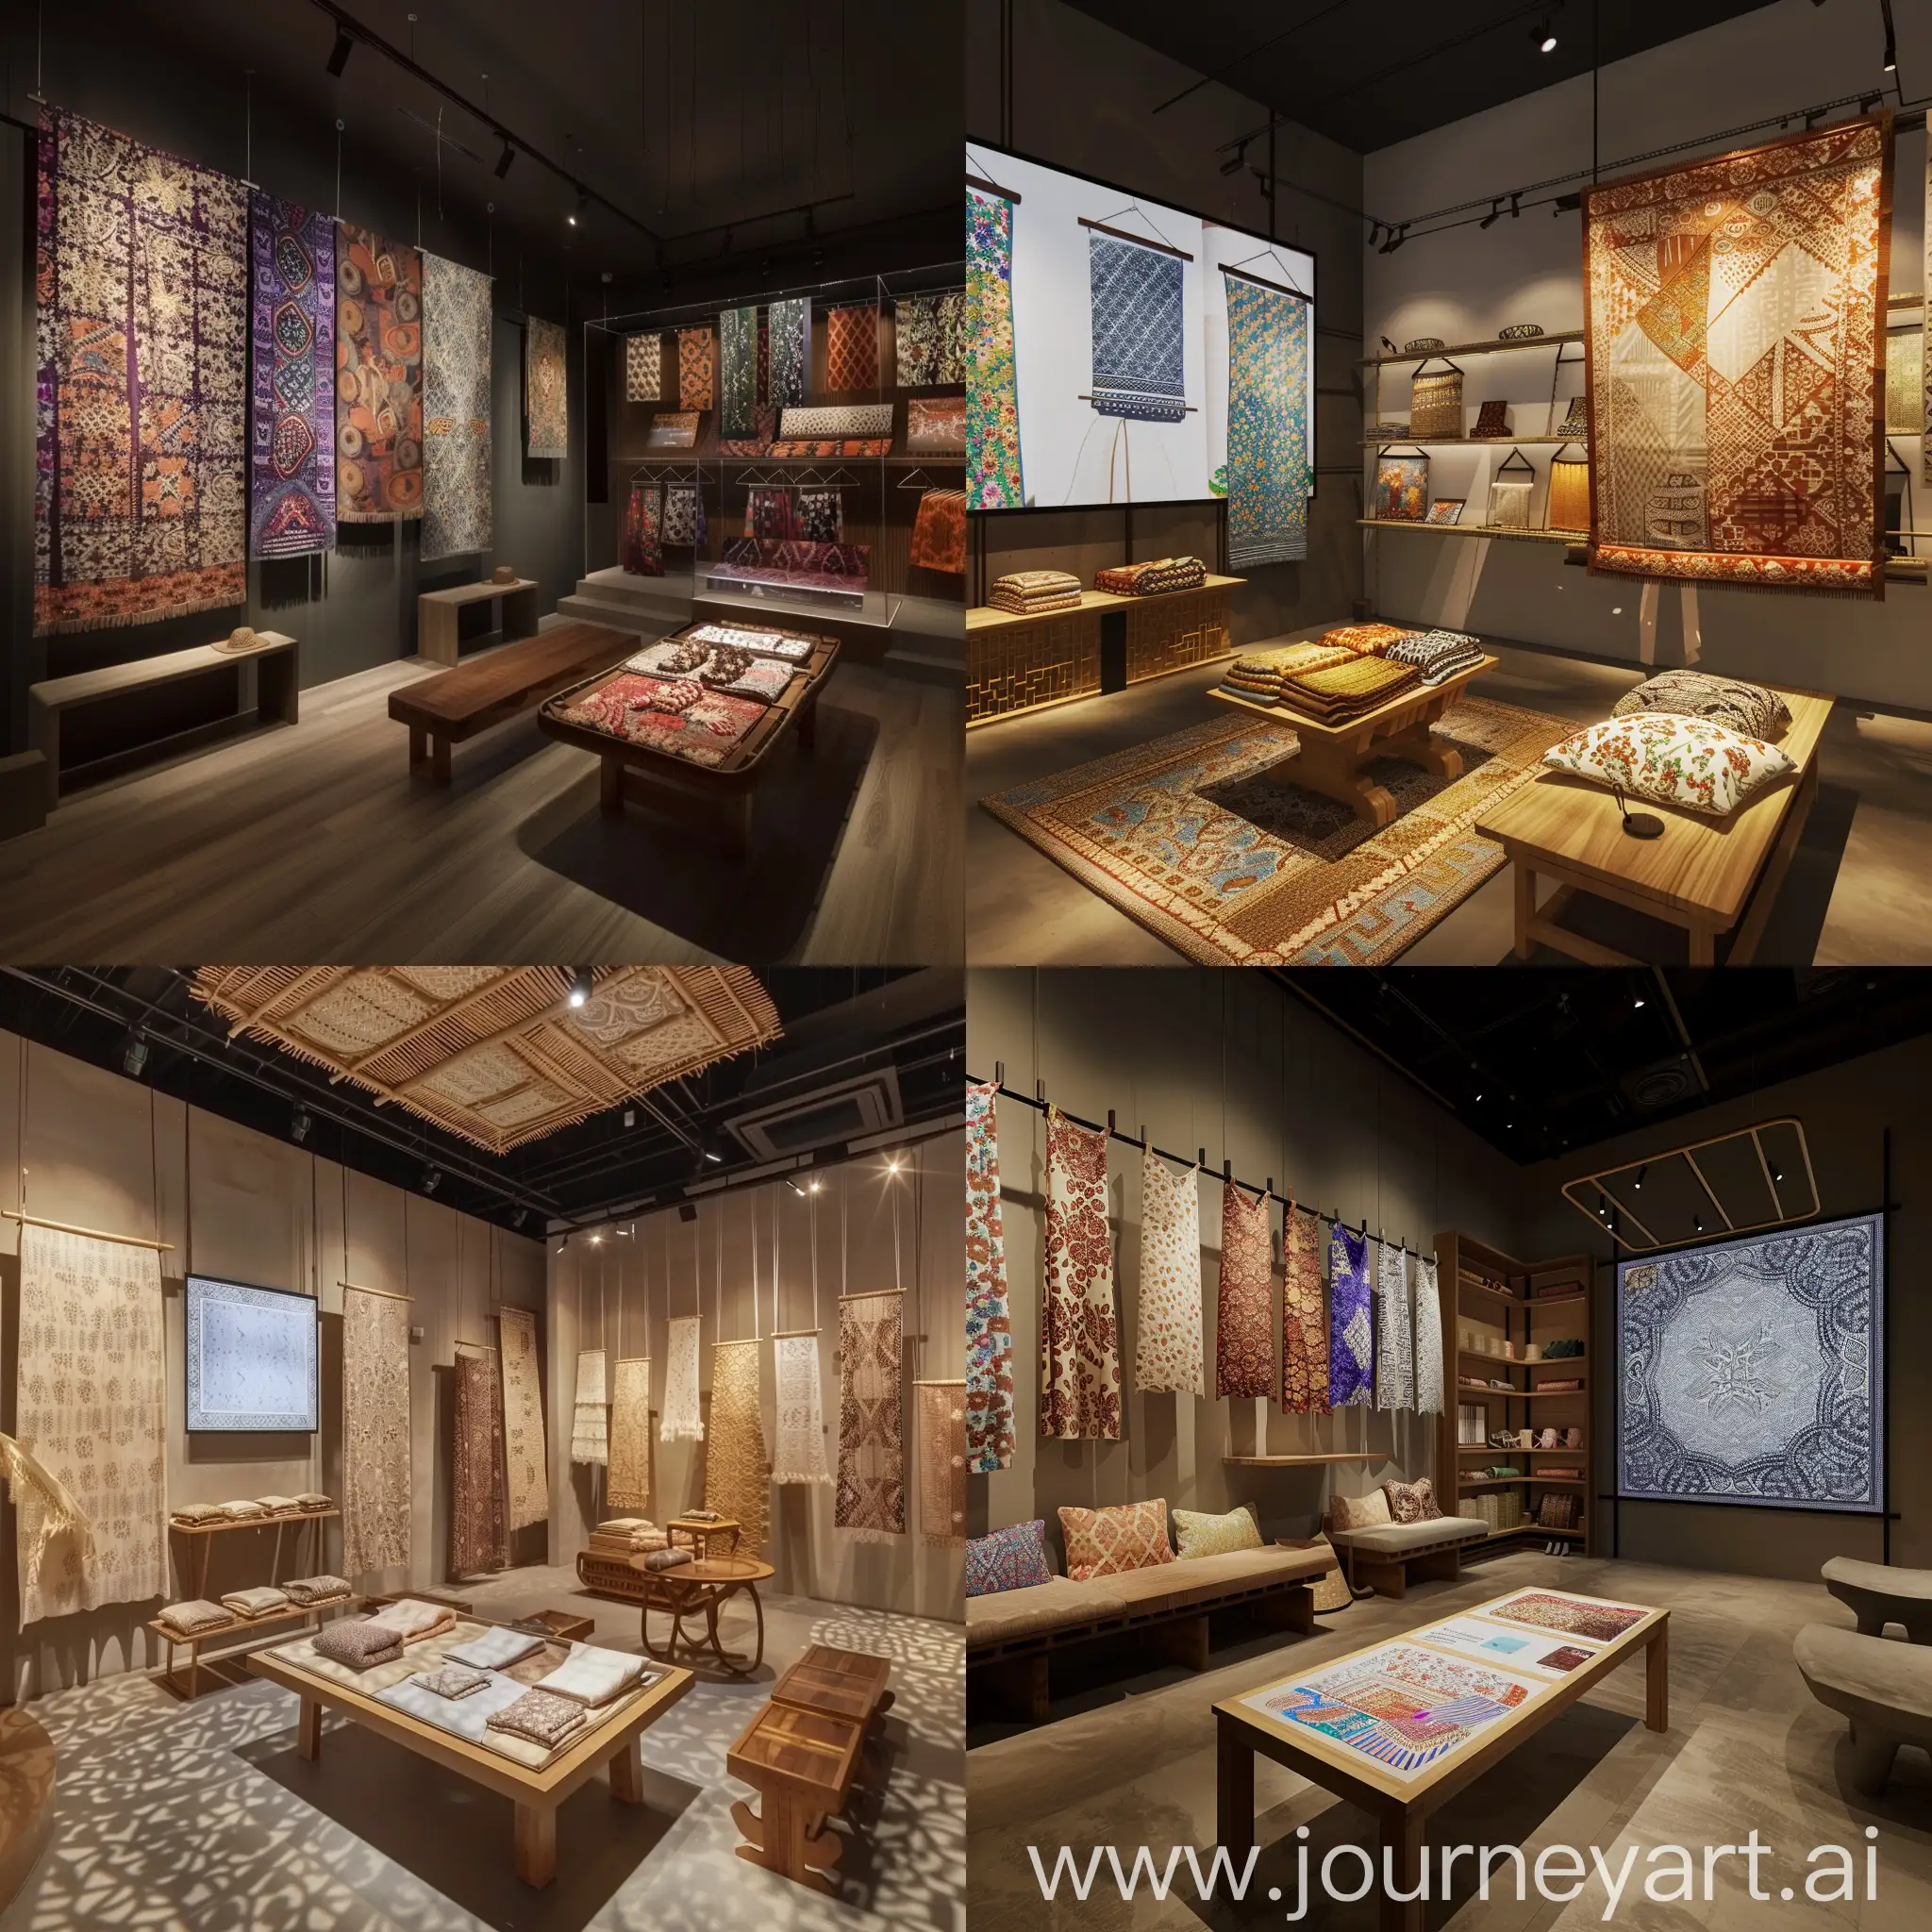 fabri shorwroom interior inspired by indonesian culture, with hang display, seating area, display table, and fabric virtual visualisation screen on the wall.